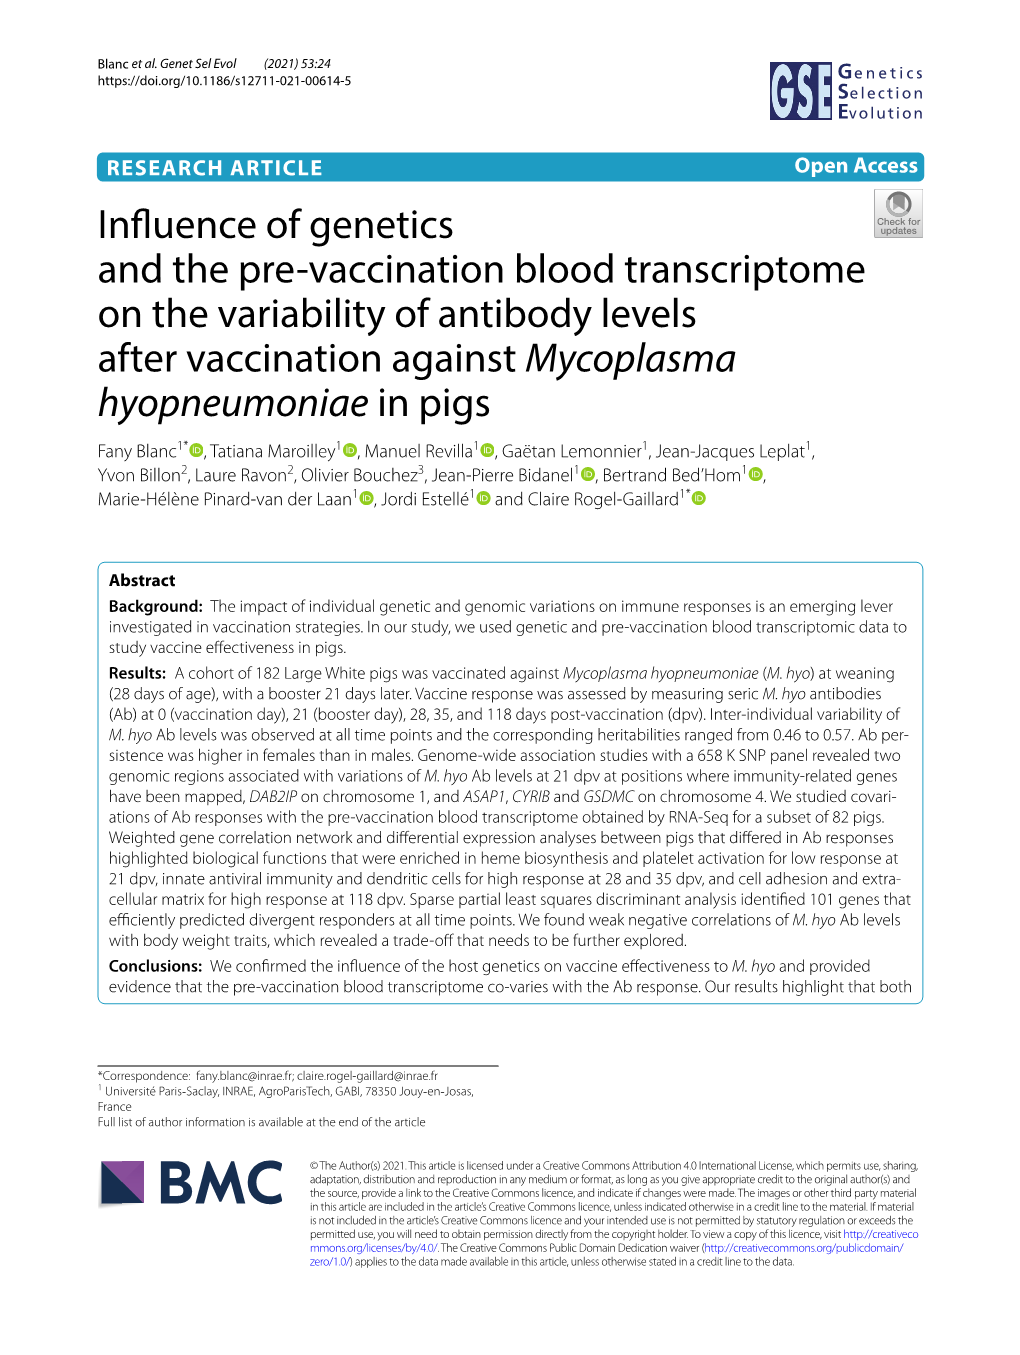 Influence of Genetics and the Pre-Vaccination Blood Transcriptome